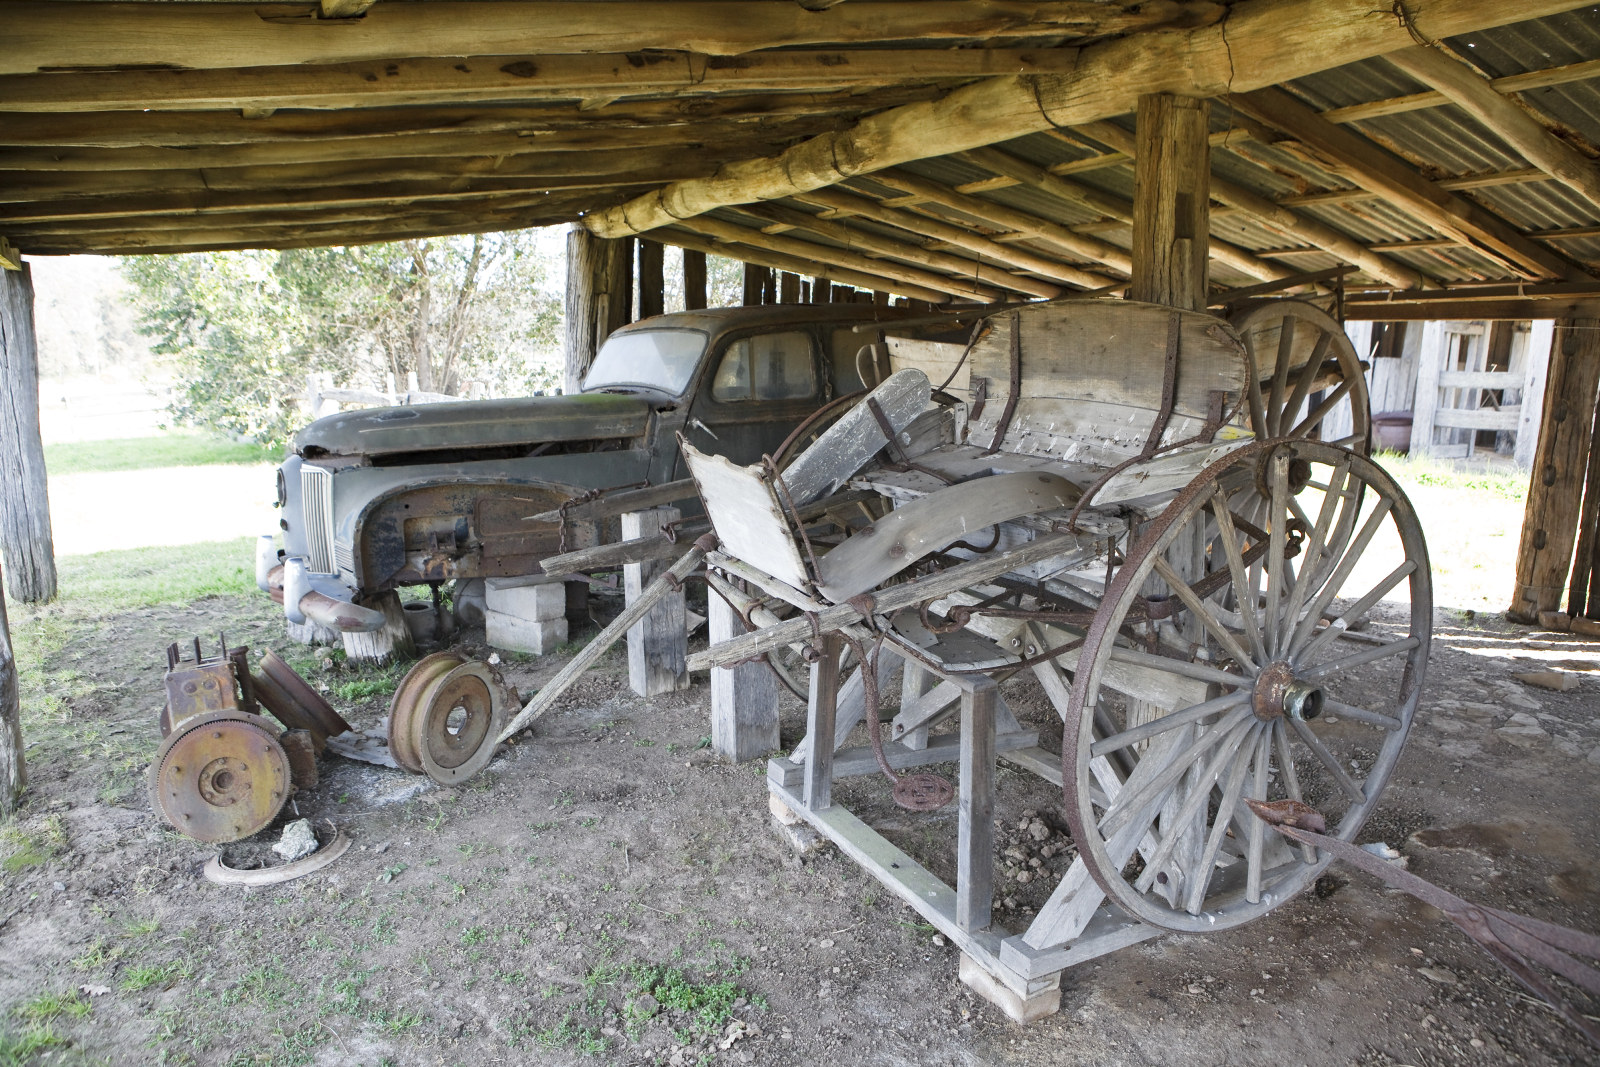 Old car in the cart shed with cart in foreground, Rouse Hill House and Farm.